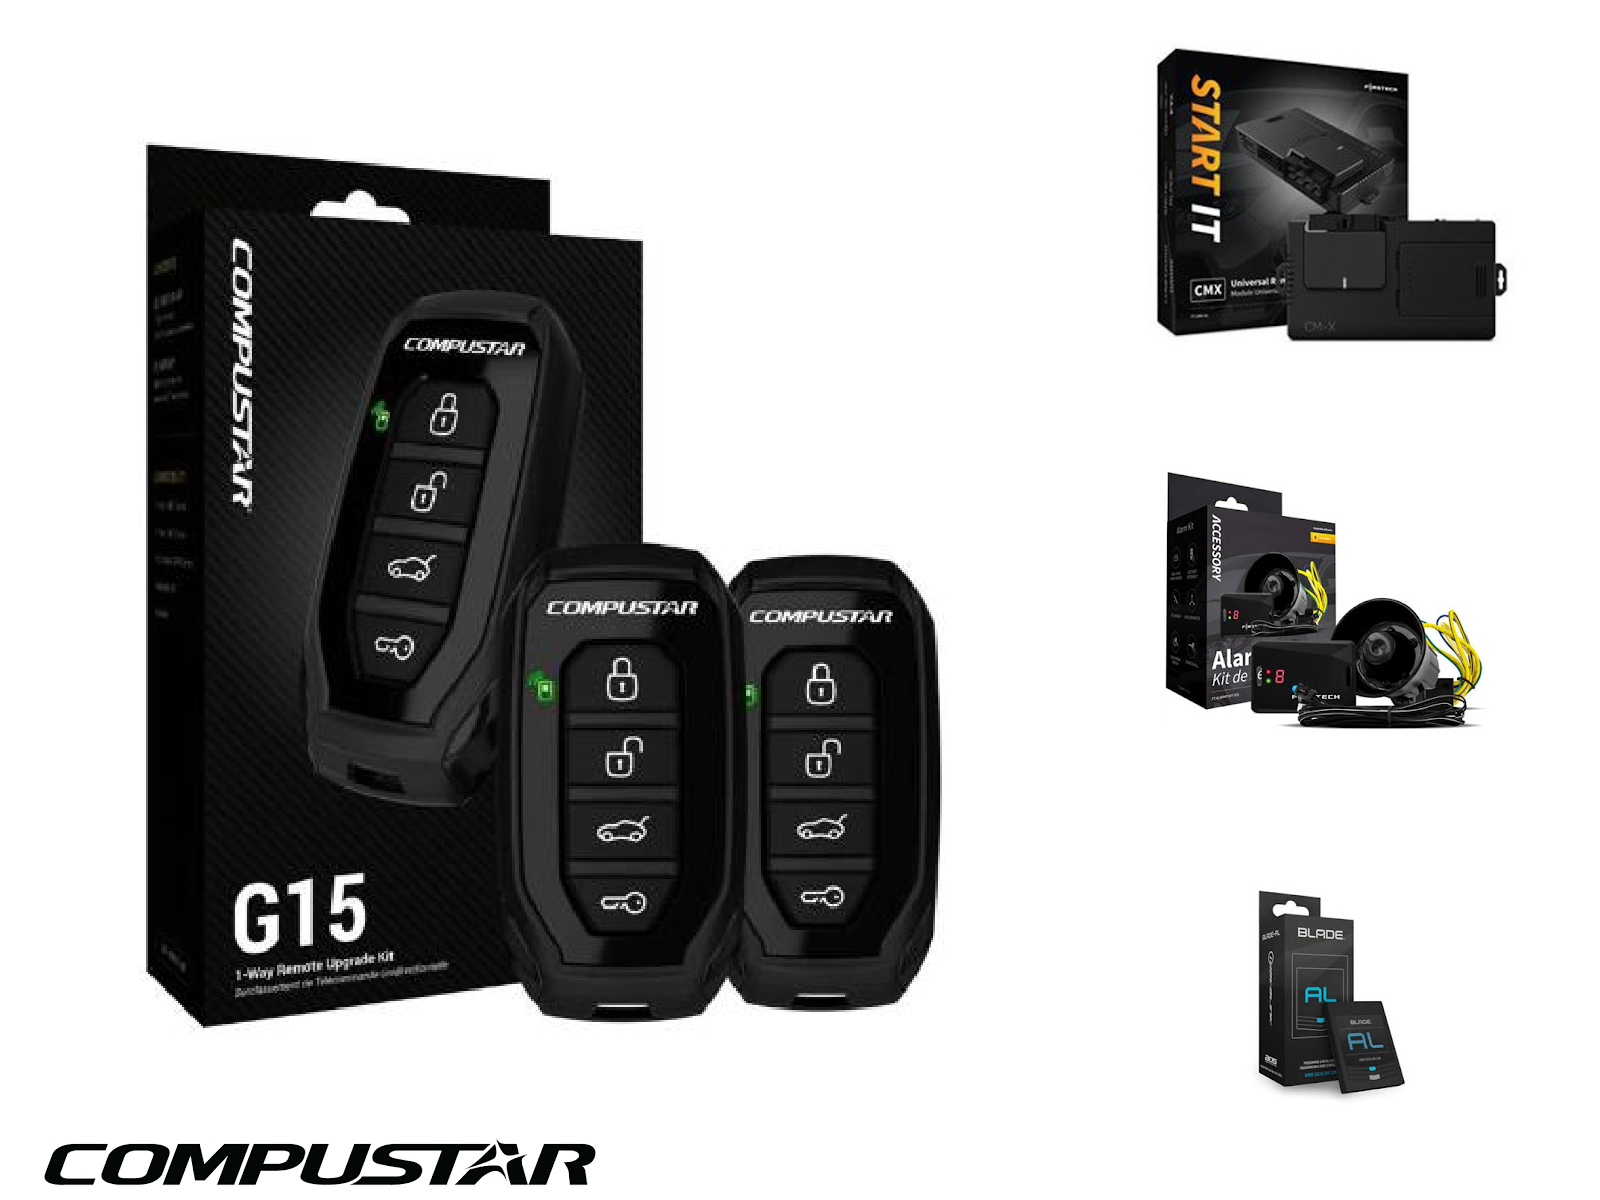 Compustar G15 with CMX Car Alarm with Remote Starter, 1-Way, 2000 Foot Range ⭕ iDatalink BLADE-AL Interface Included